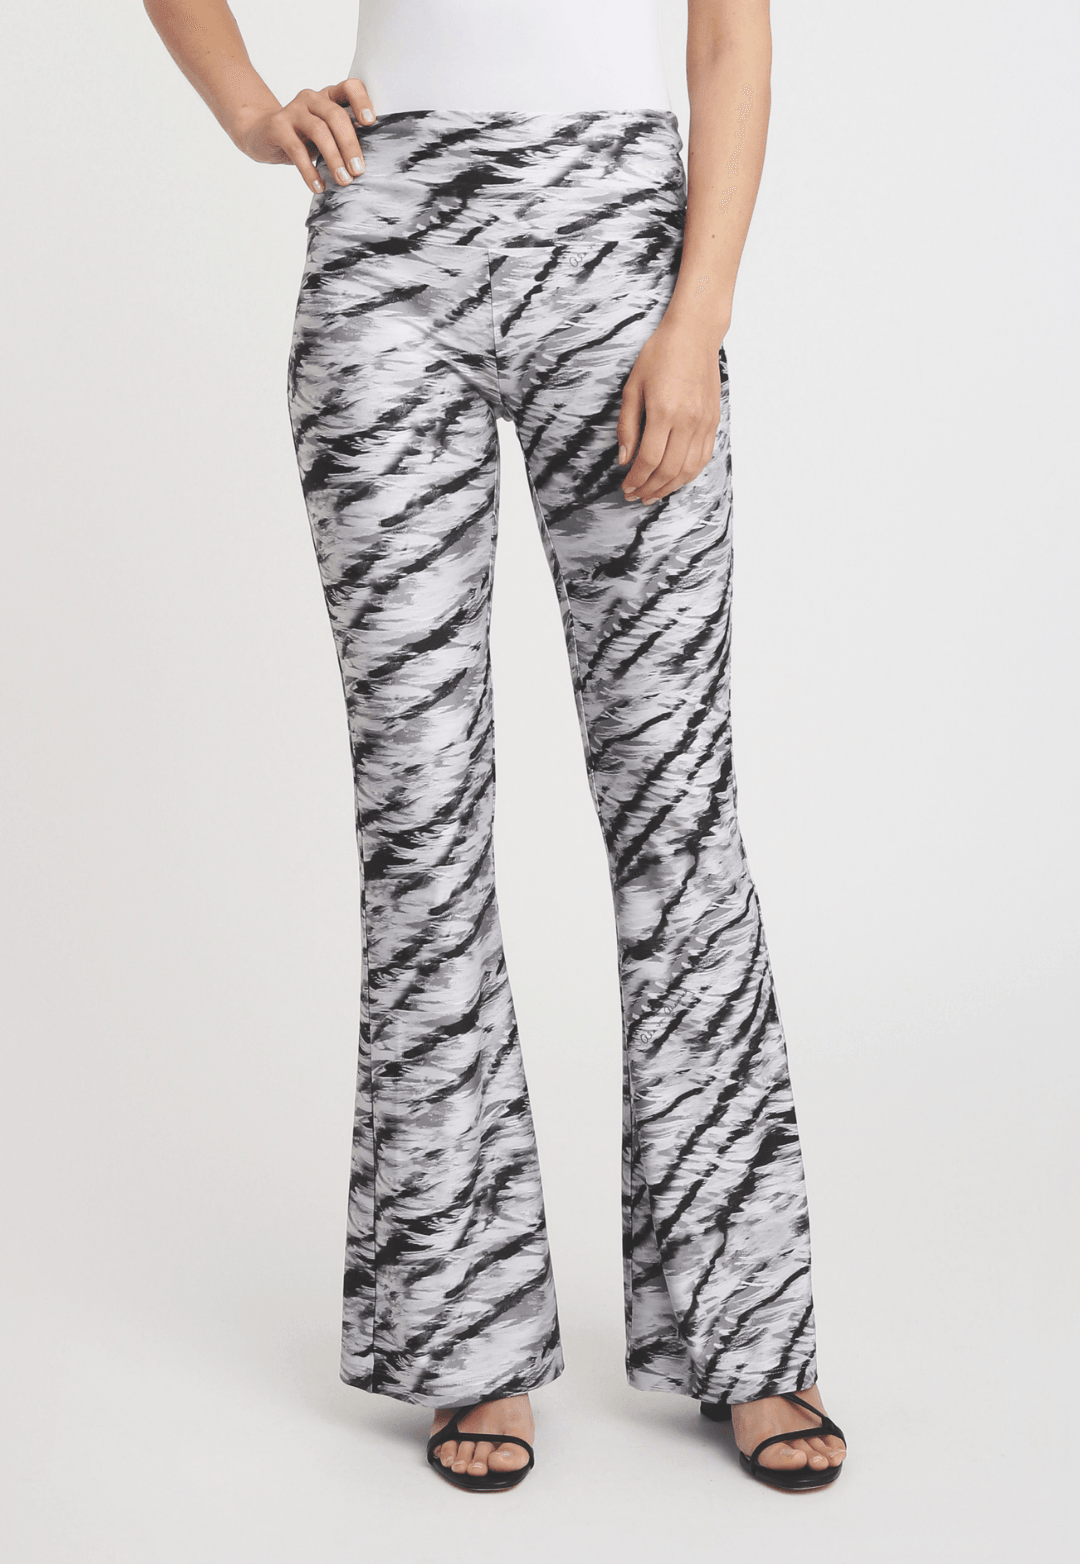 black and white tiger printed stretch knit pants